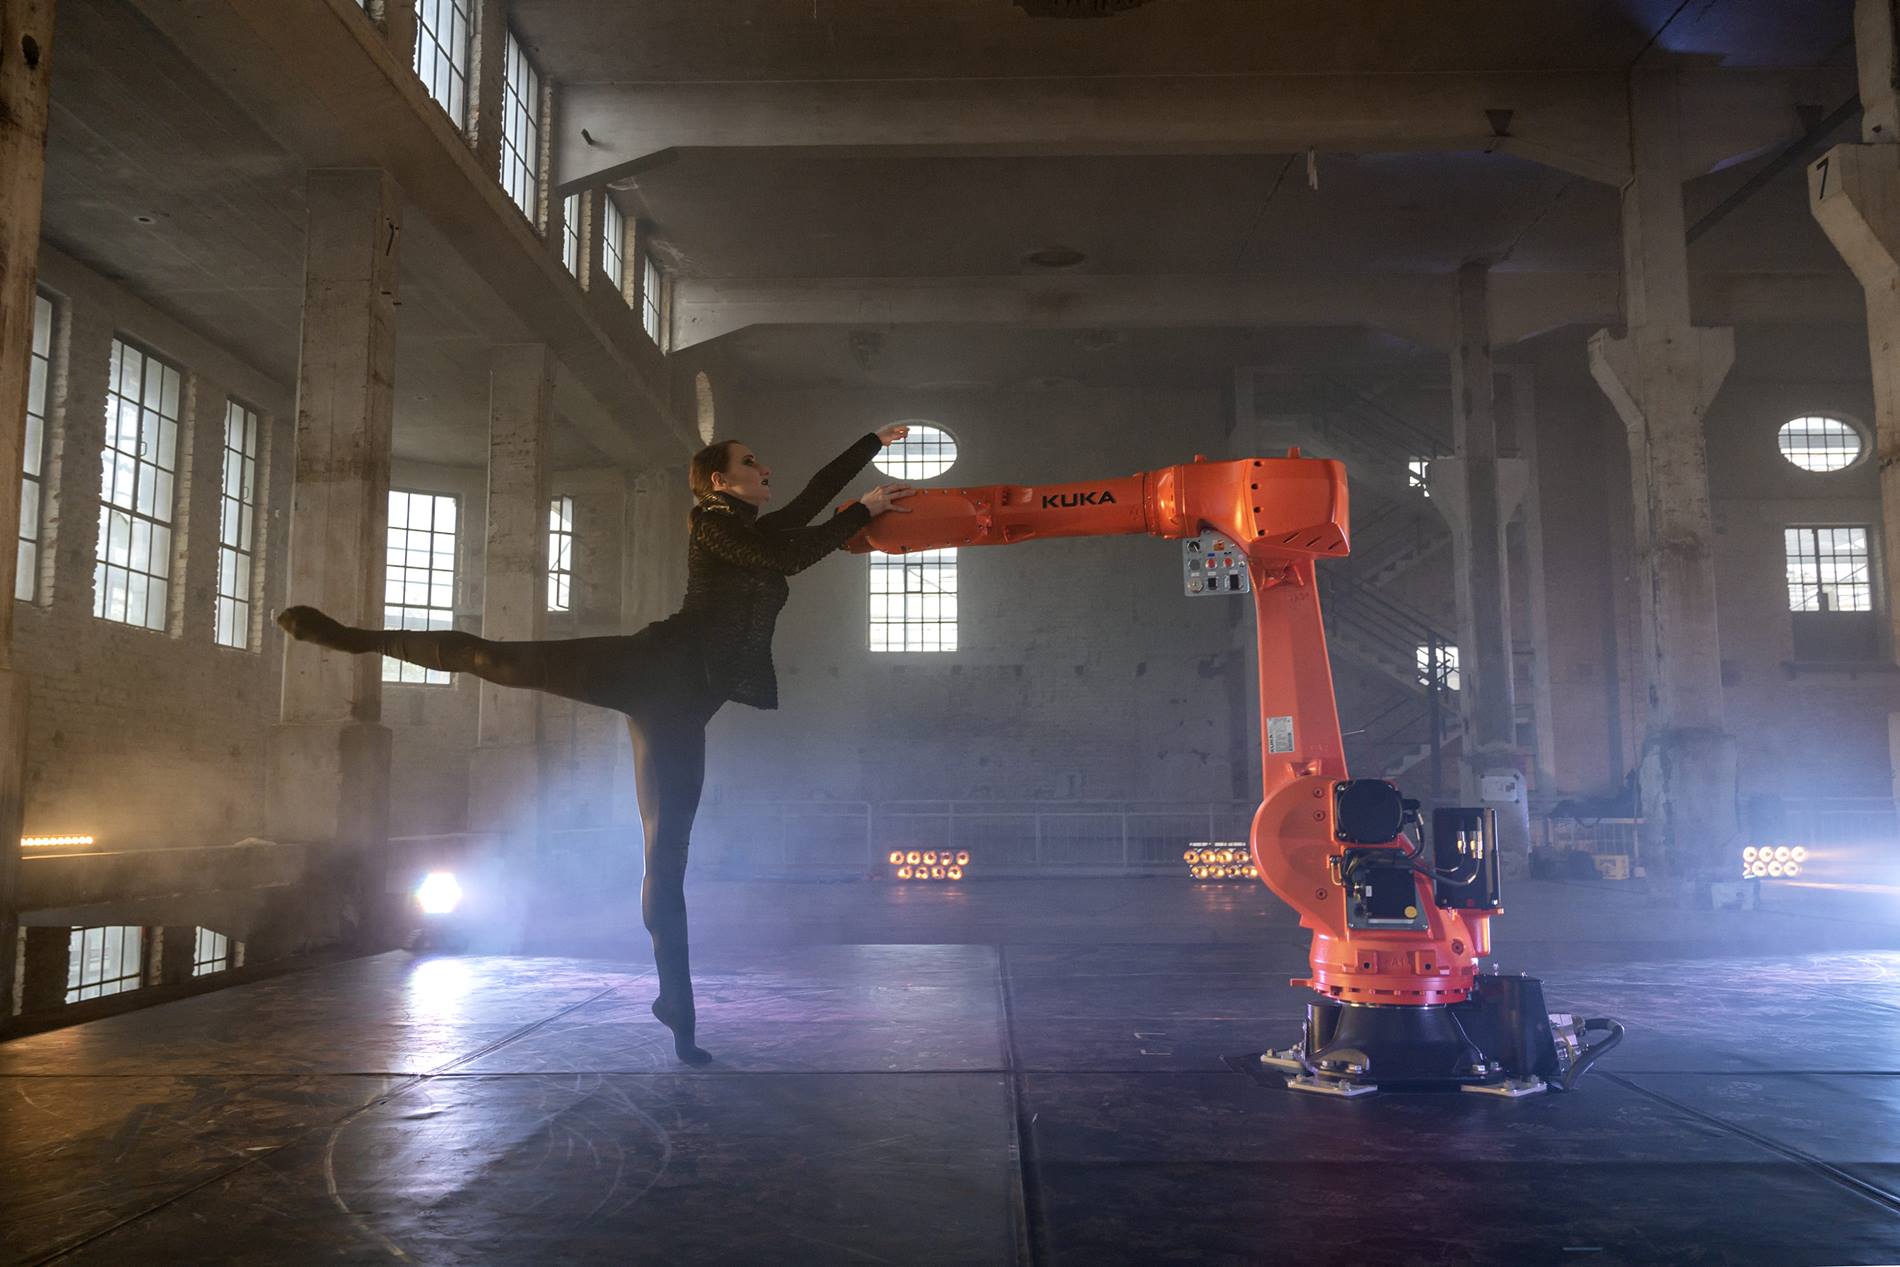 KUKA robot dances on stage at the Augsburg State Theater with a ballet dancer